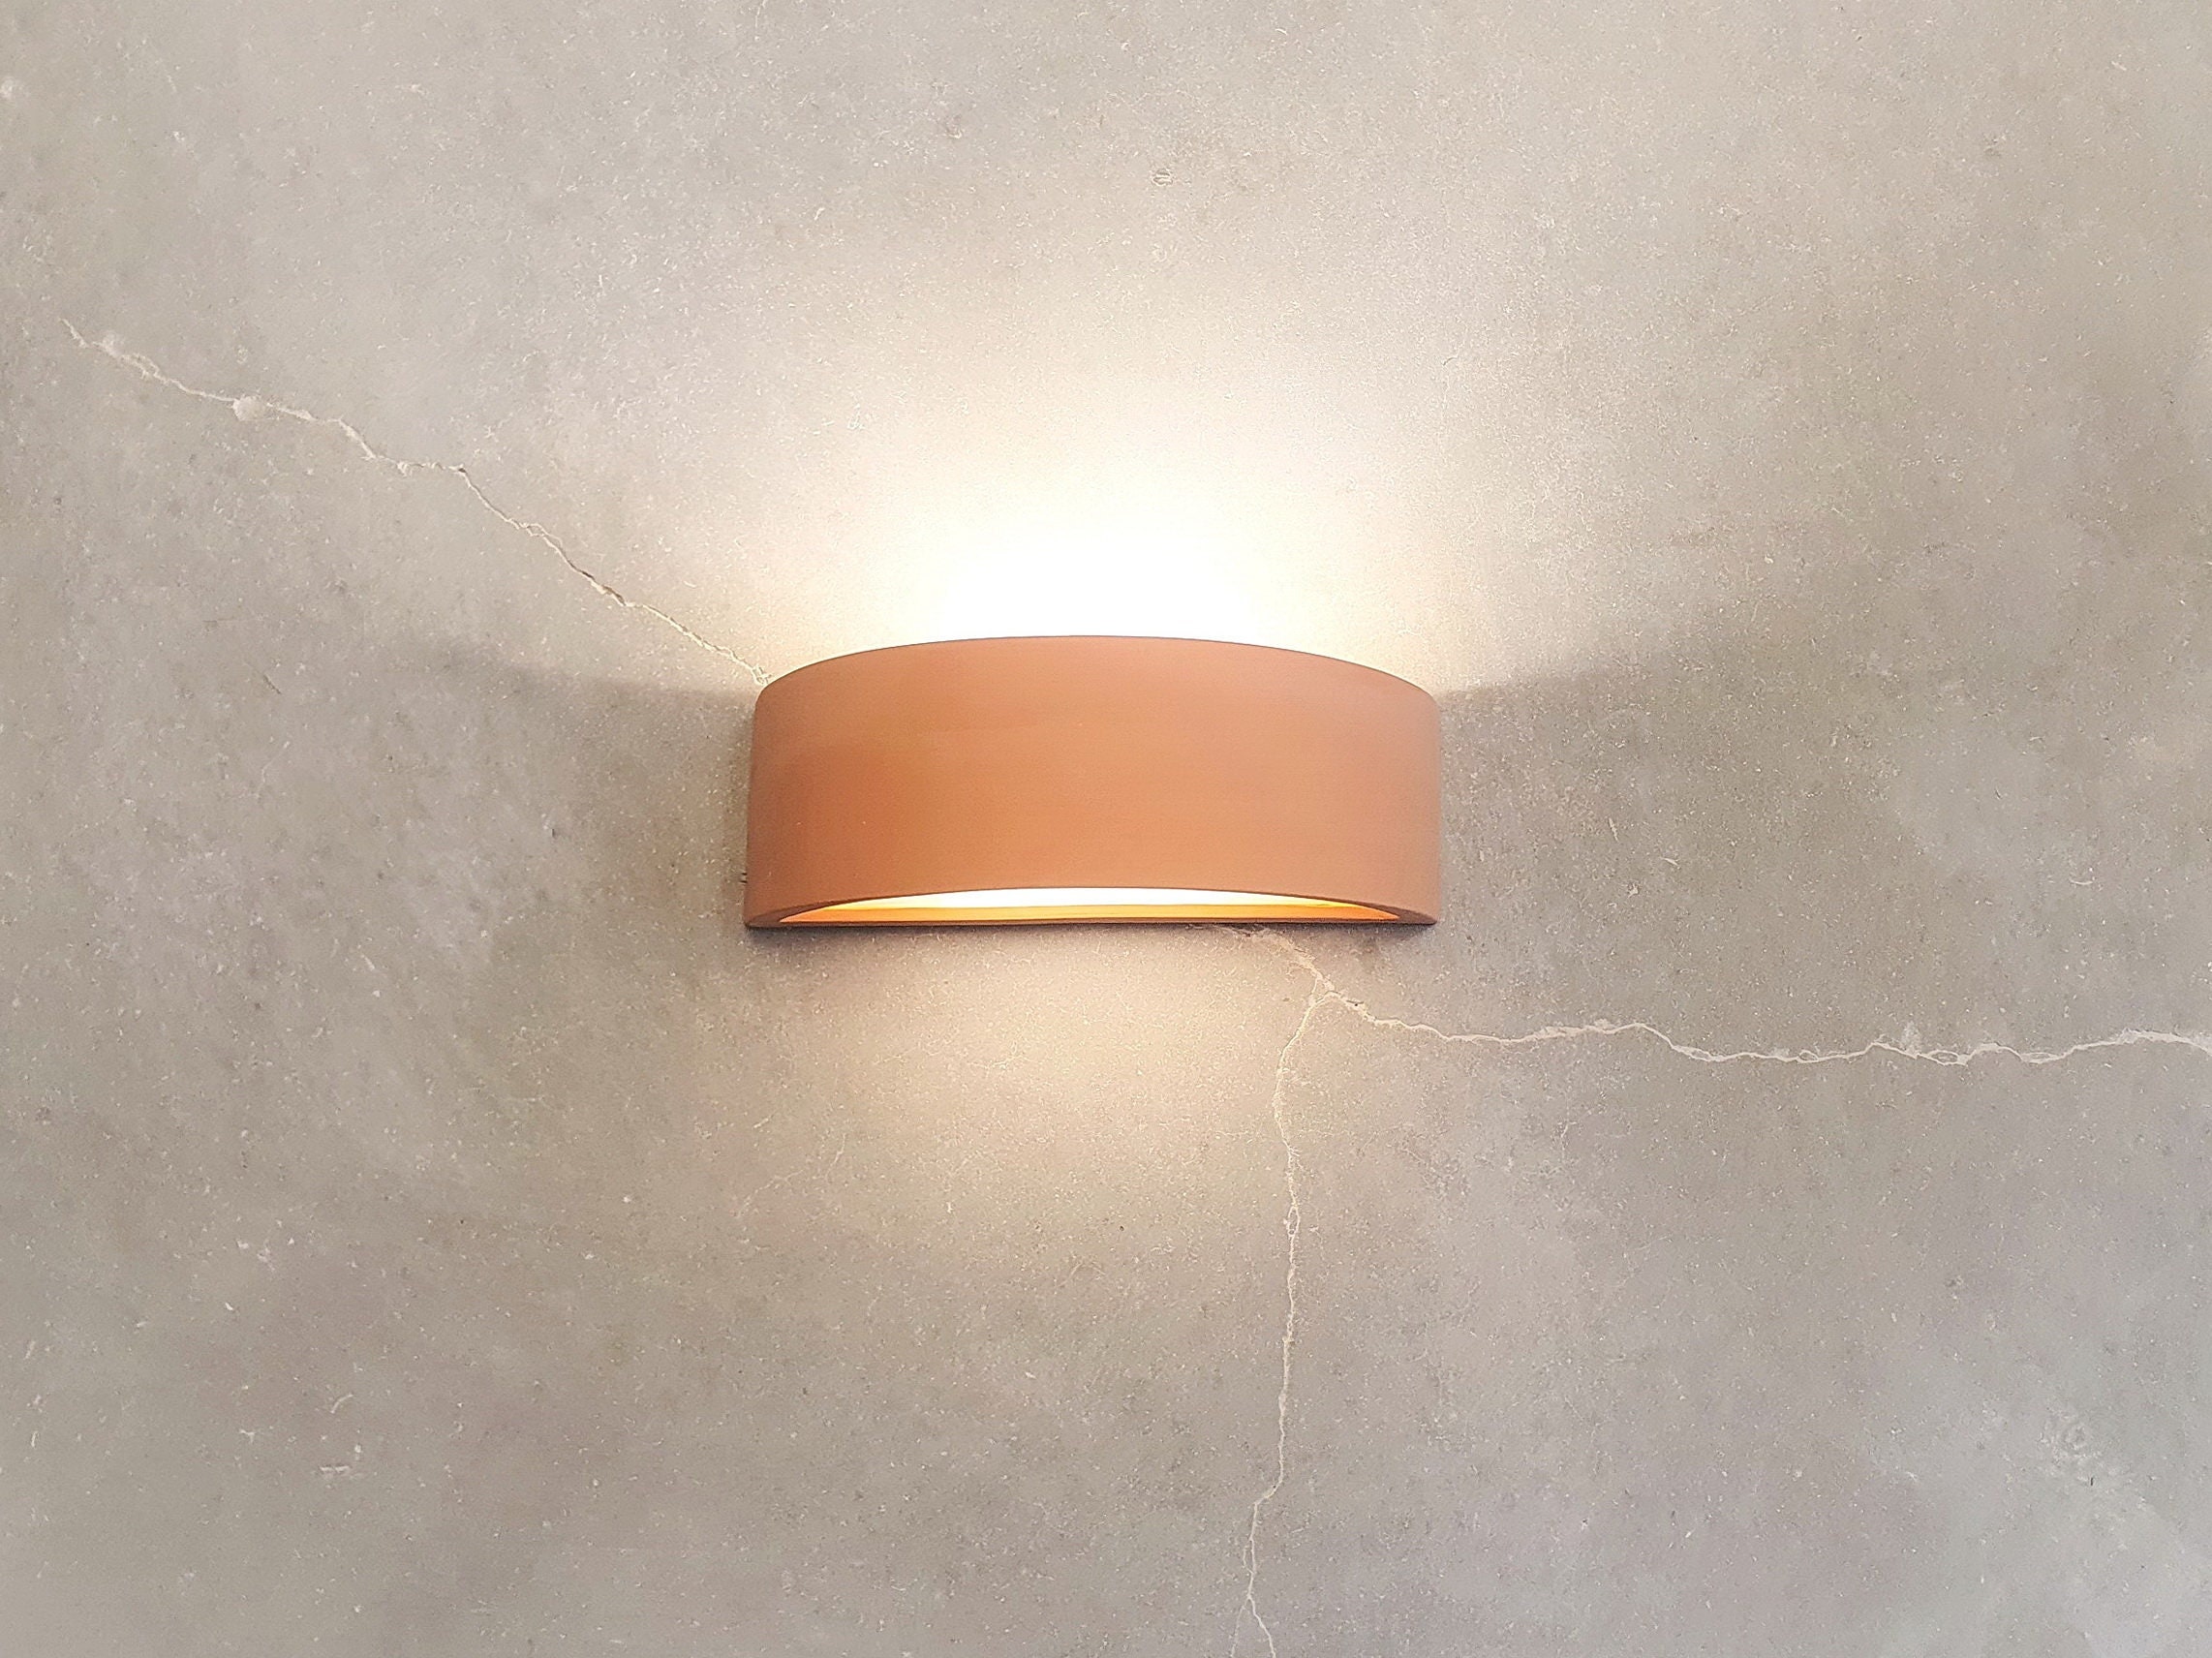 Decorative Light Wall Fixture ,ceramic Wall Lamp Shades ,arch Shape Wall  Sconce, , Terracotta Wall Sconce Wall Mount Light. - Etsy